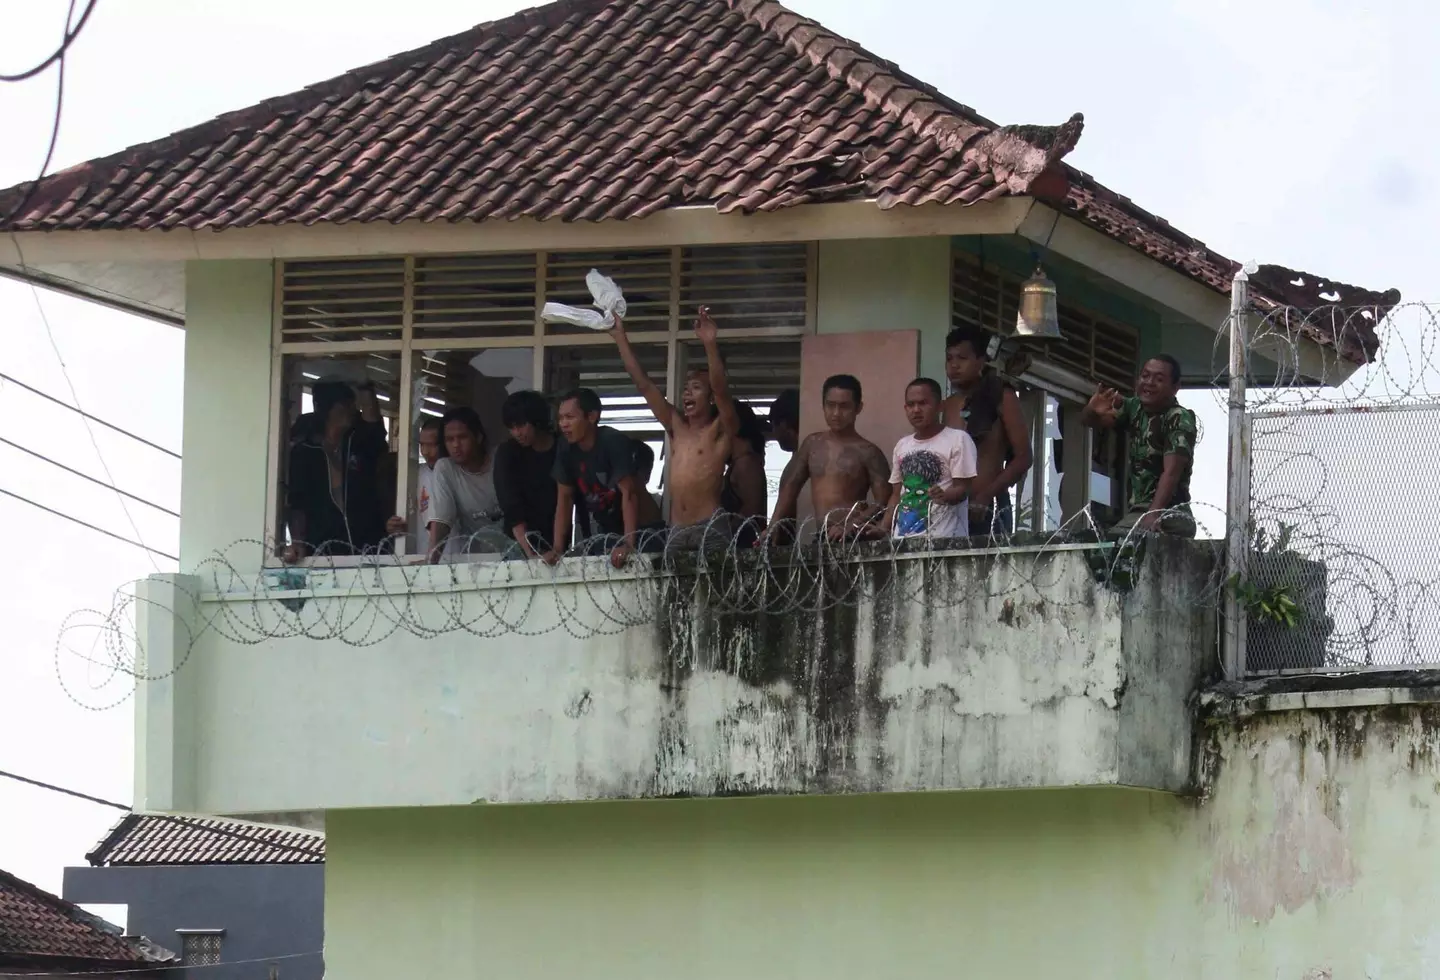 Inmates rioted at the prison in 2012.